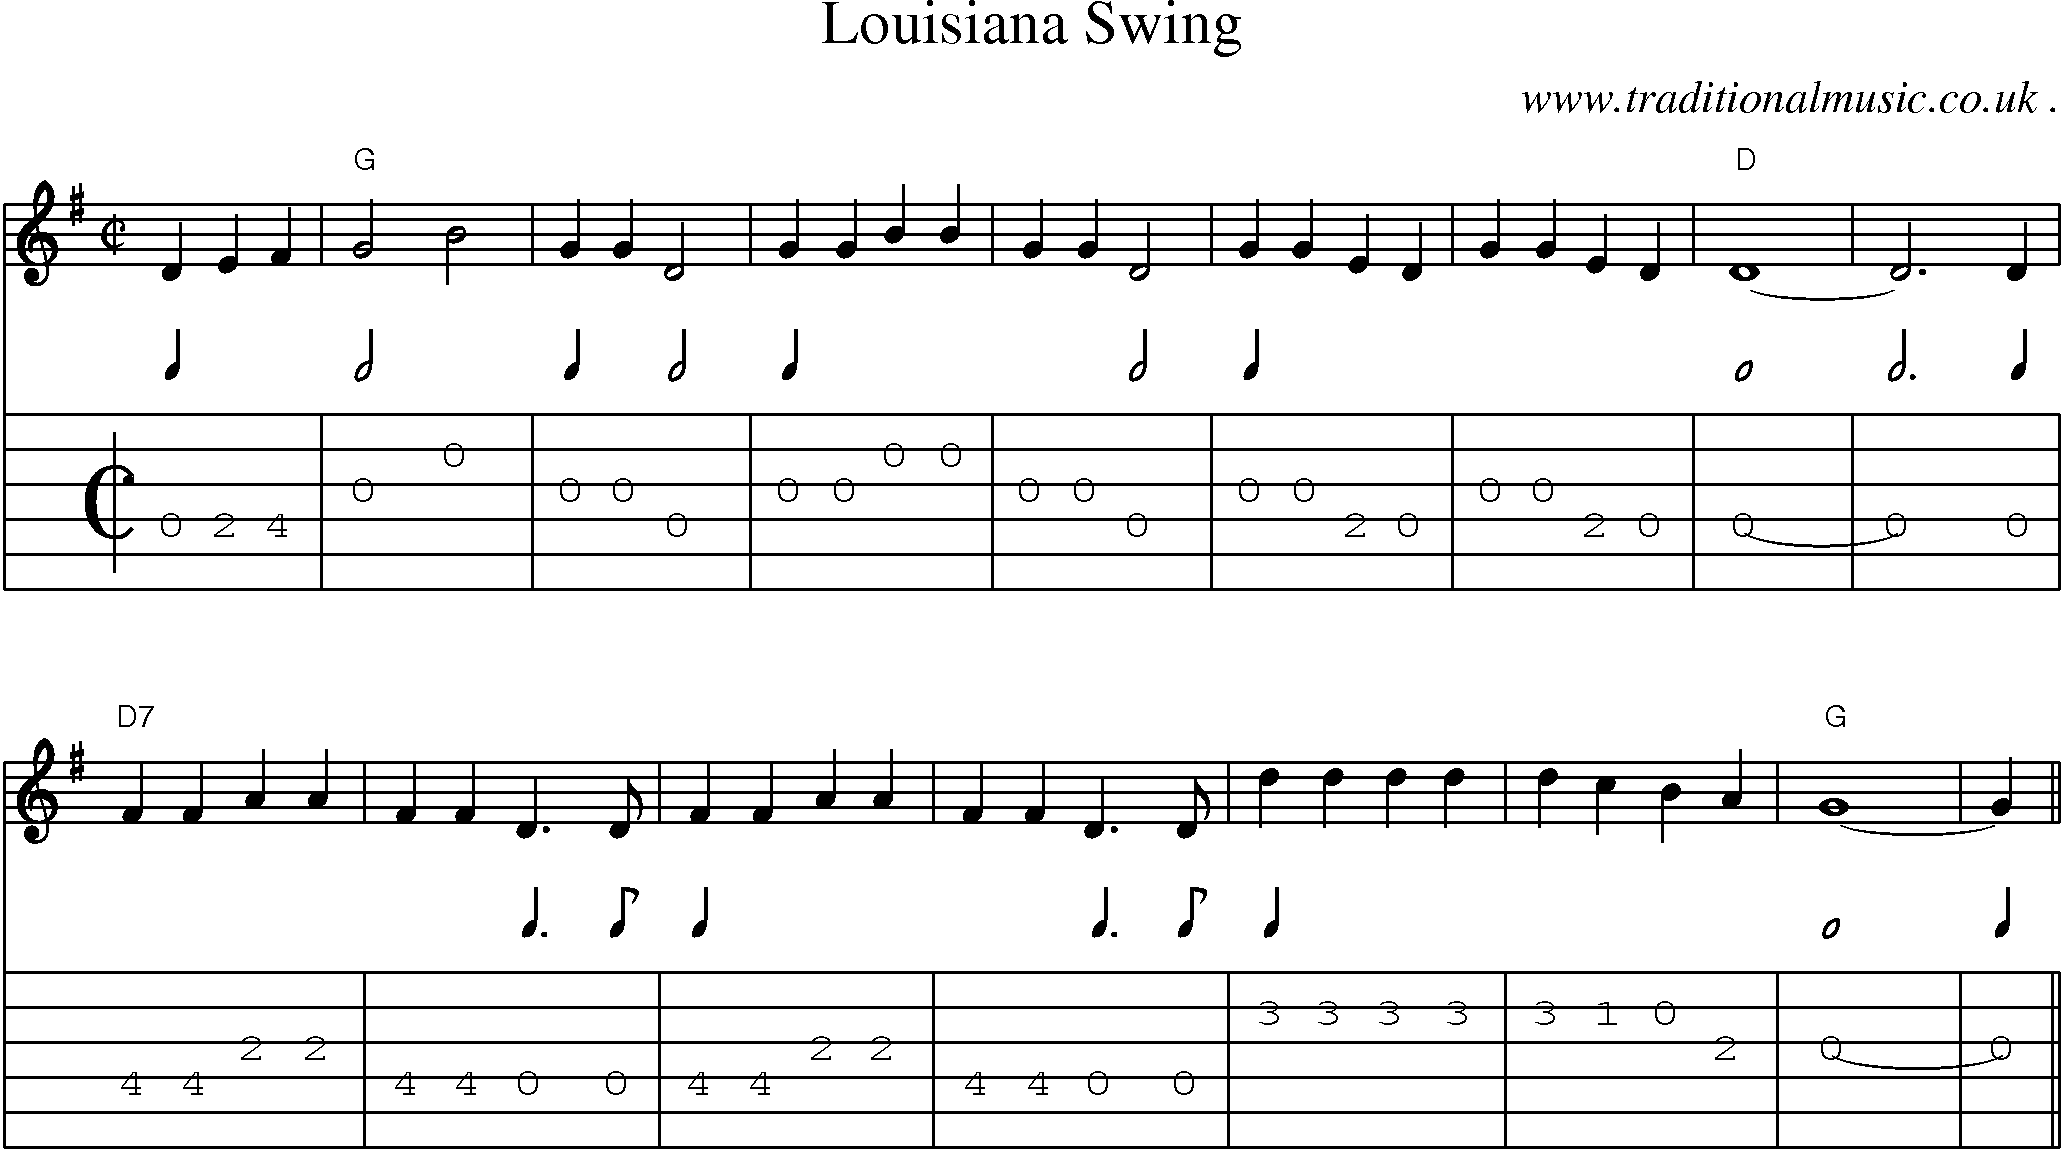 Music Score and Guitar Tabs for Louisiana Swing